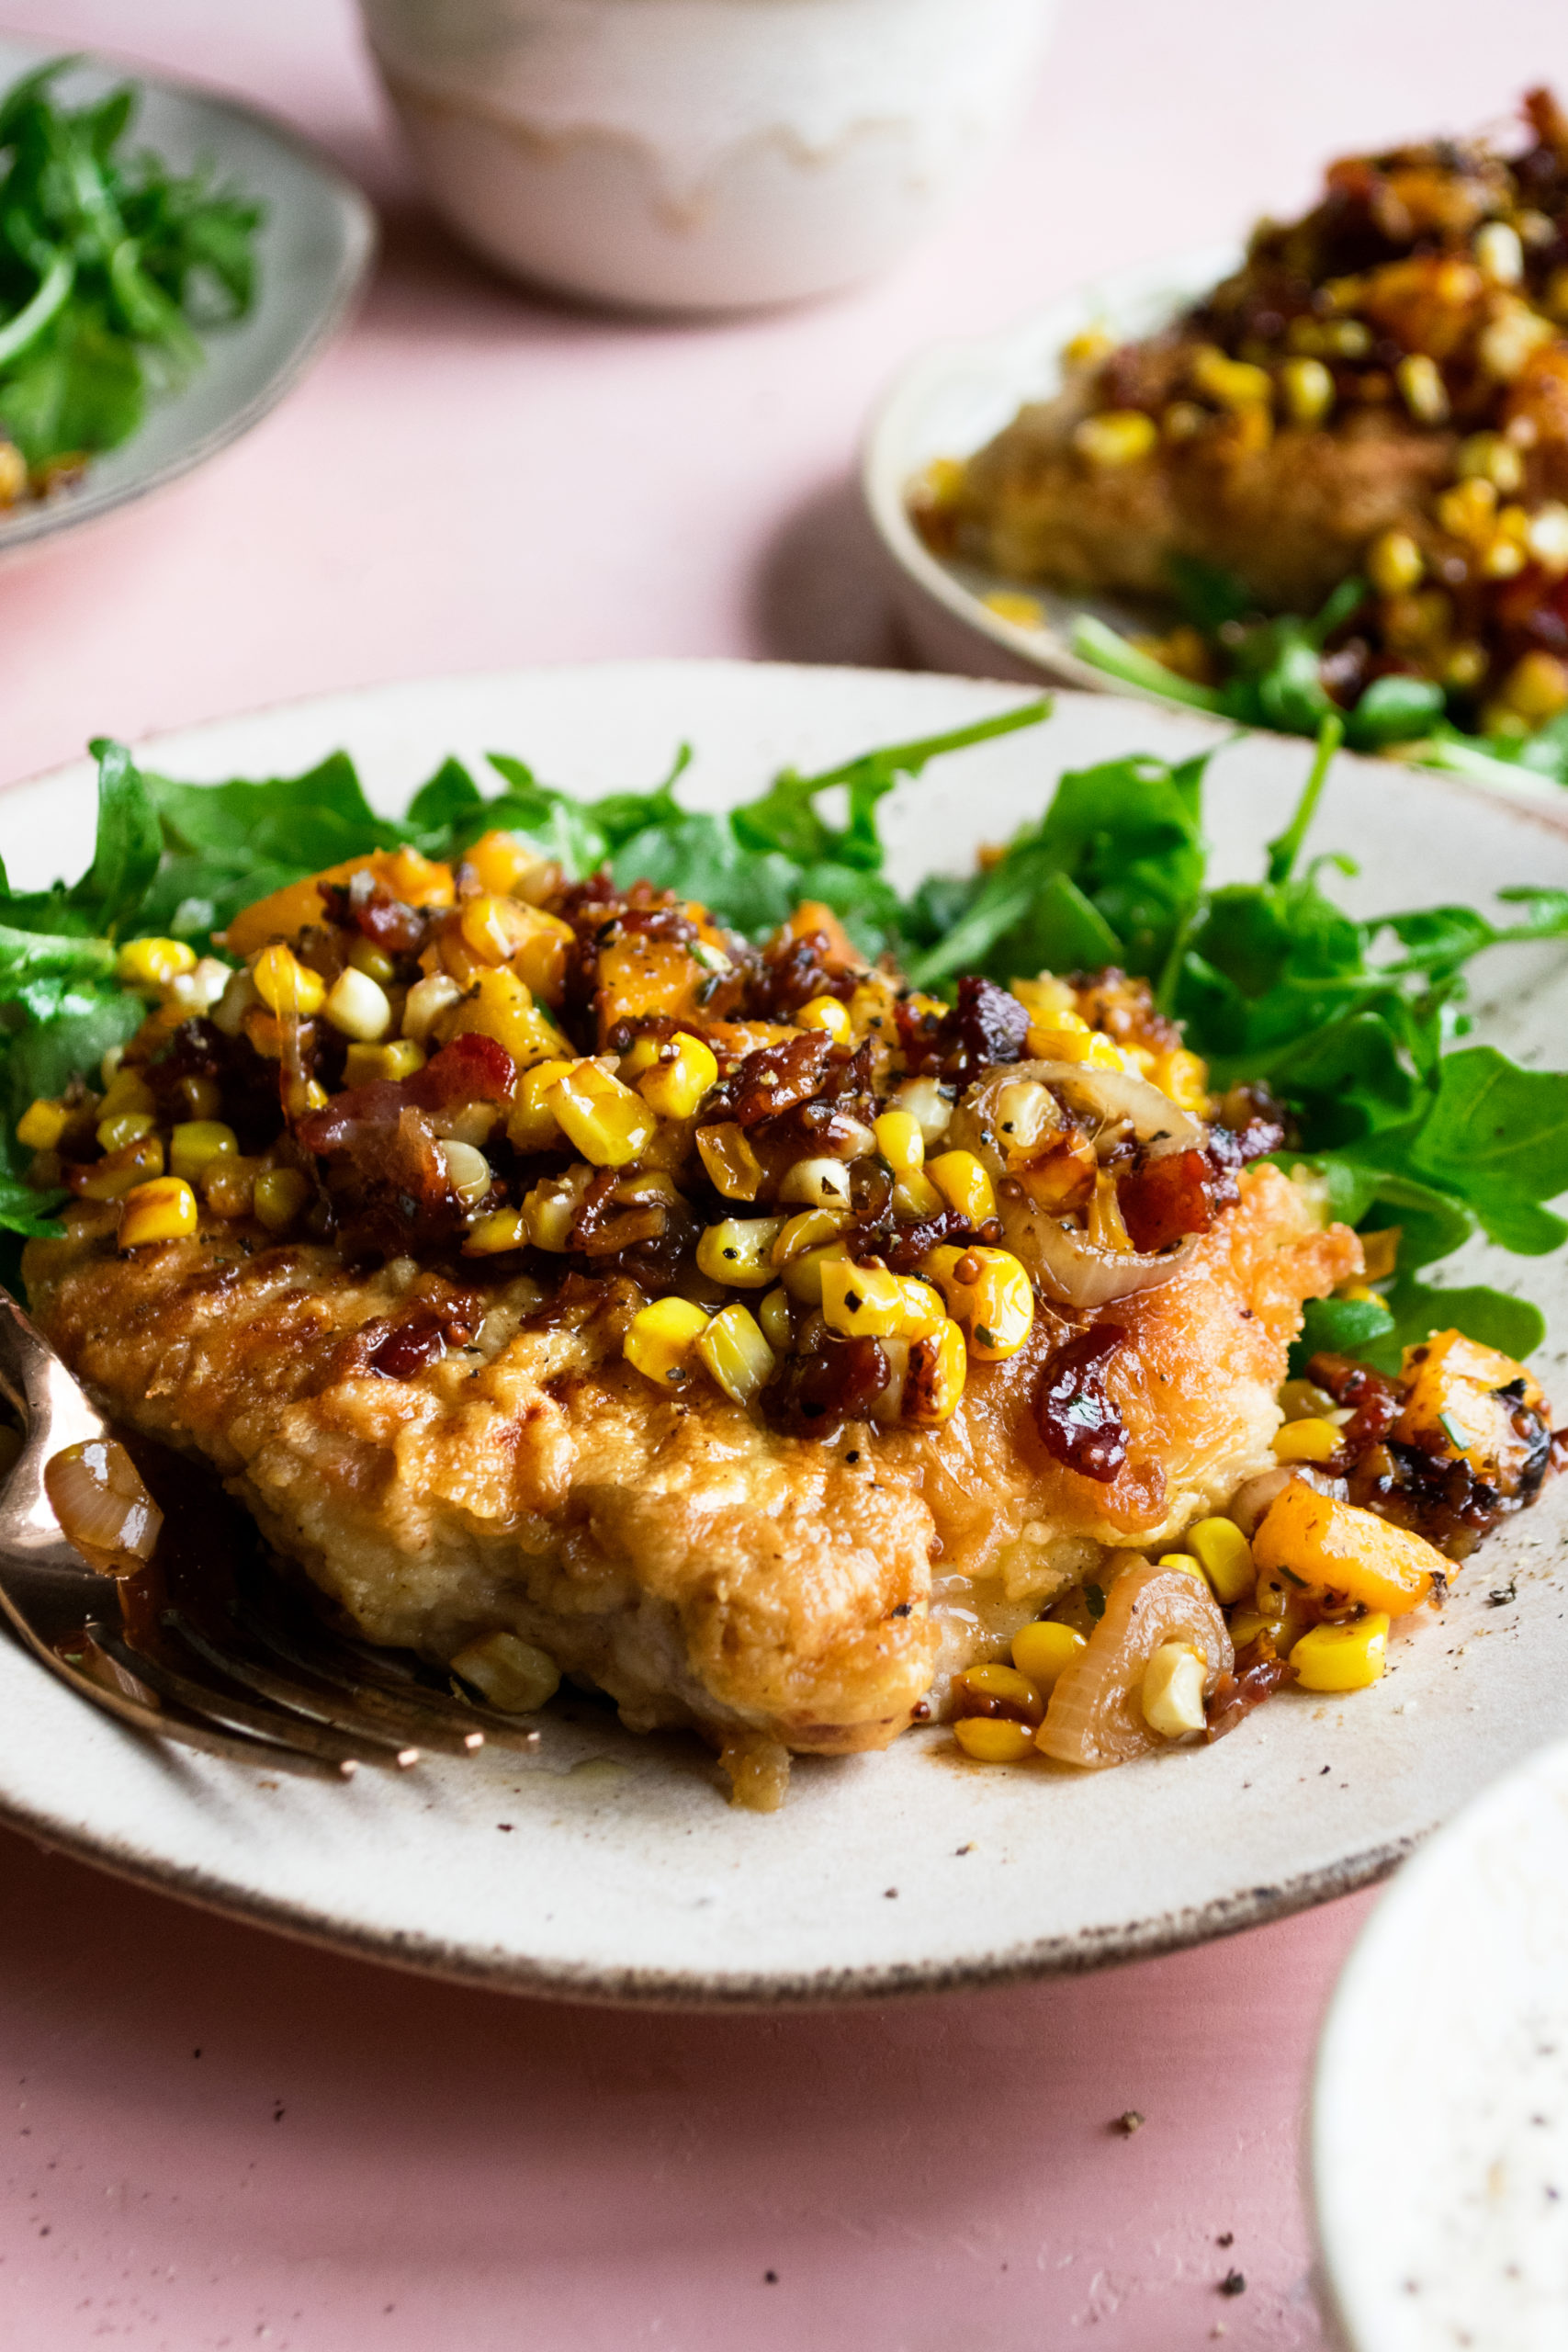 Breaded Pork Chops with Caramelized Corn - The Original Dish